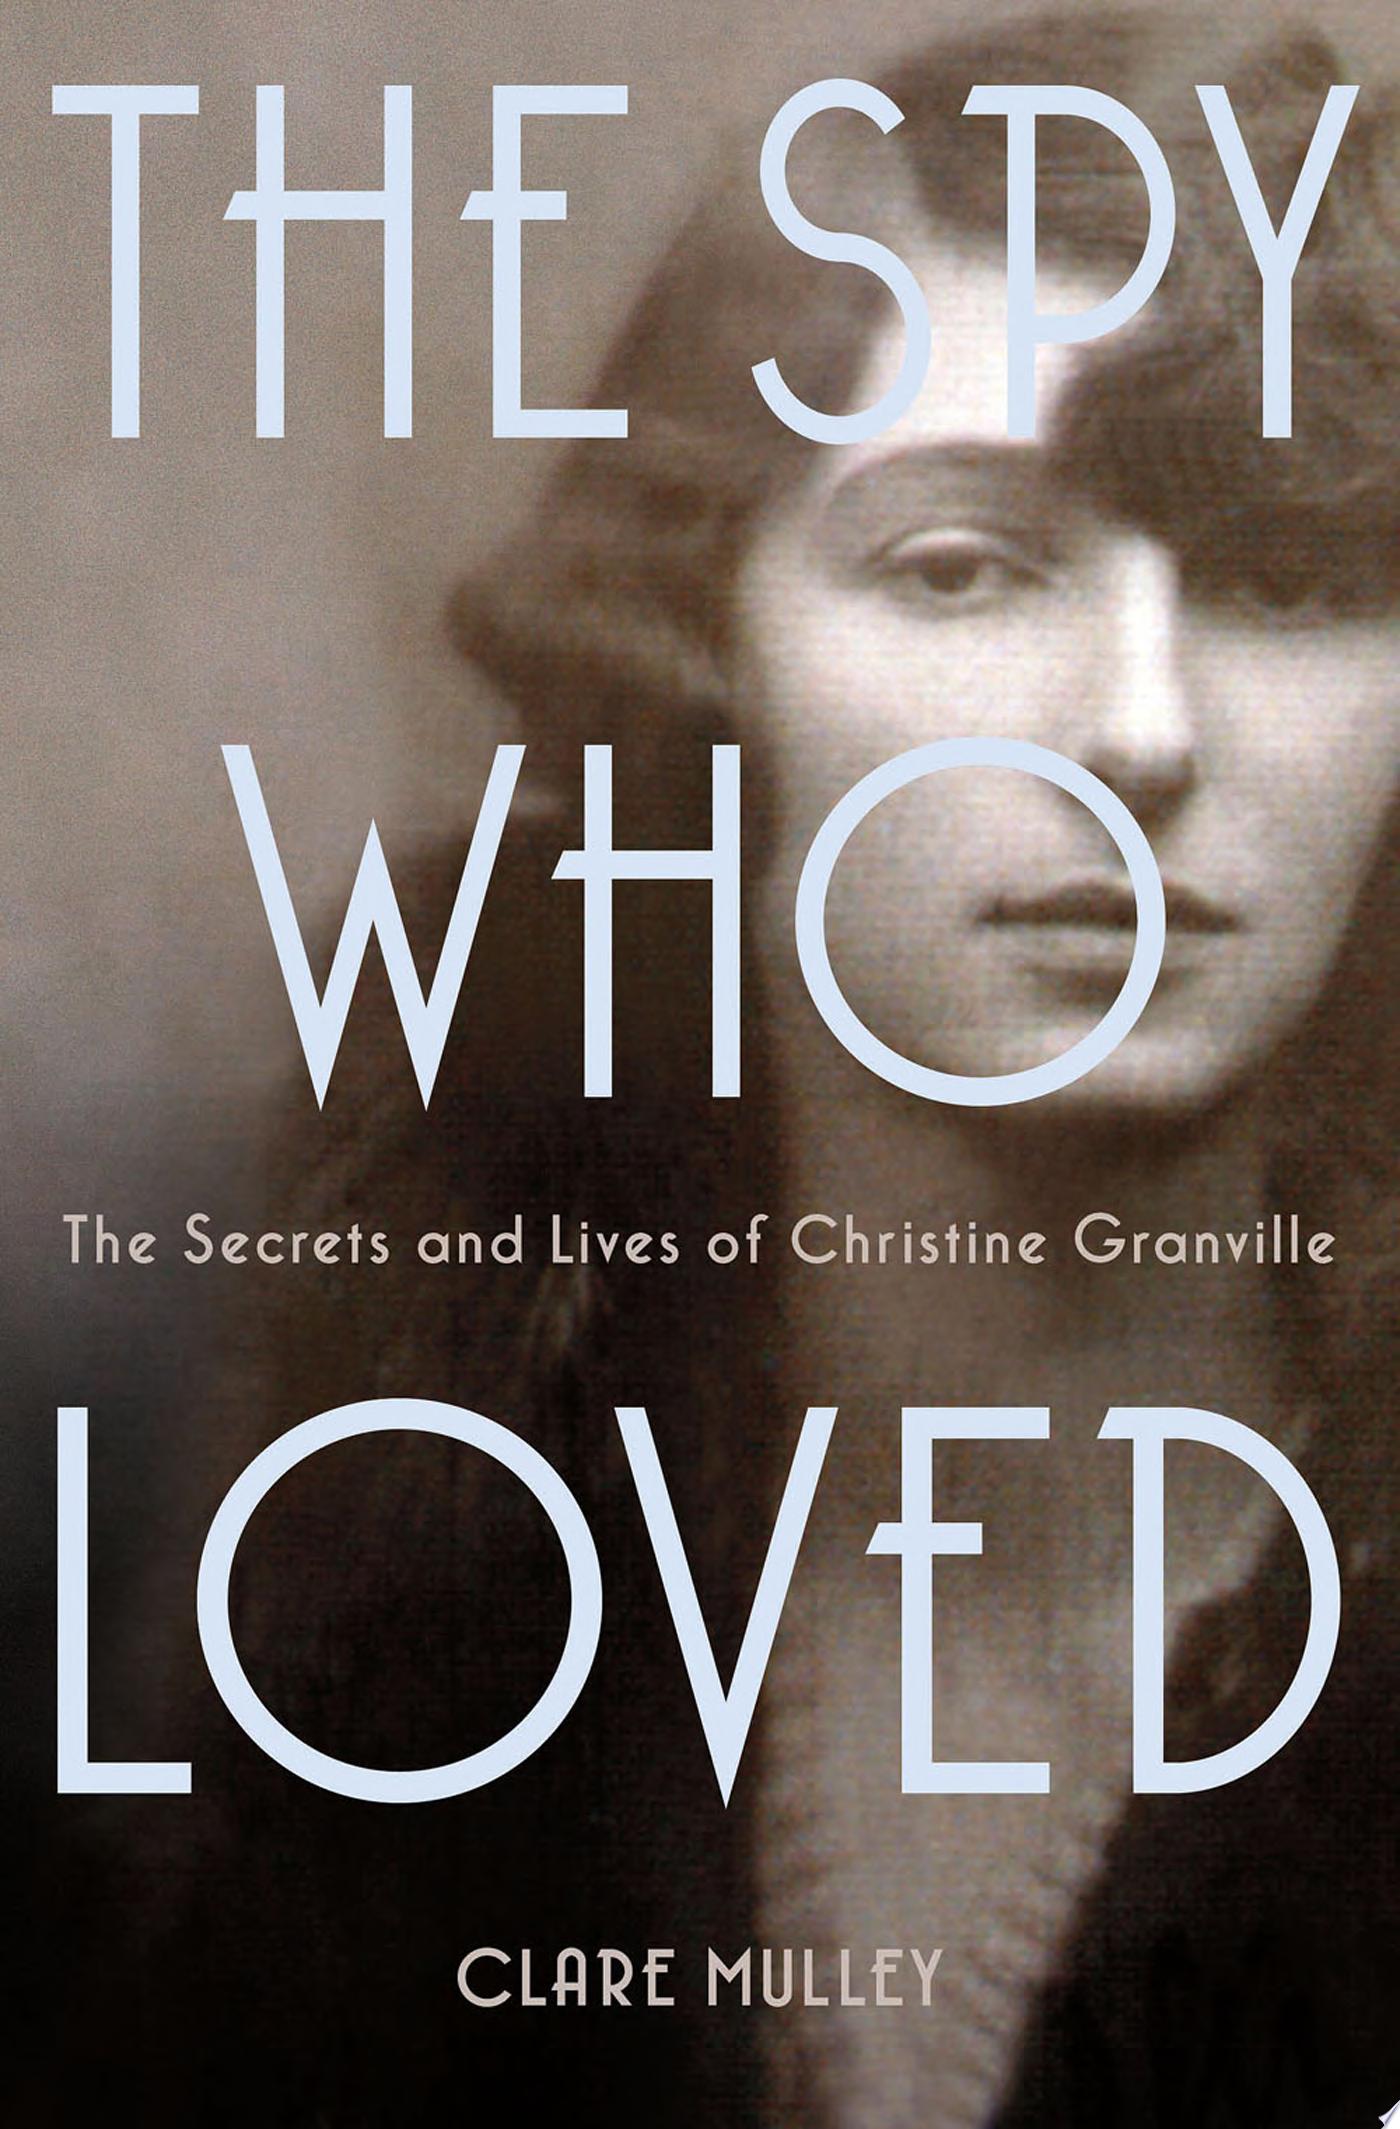 Image for "The Spy Who Loved"